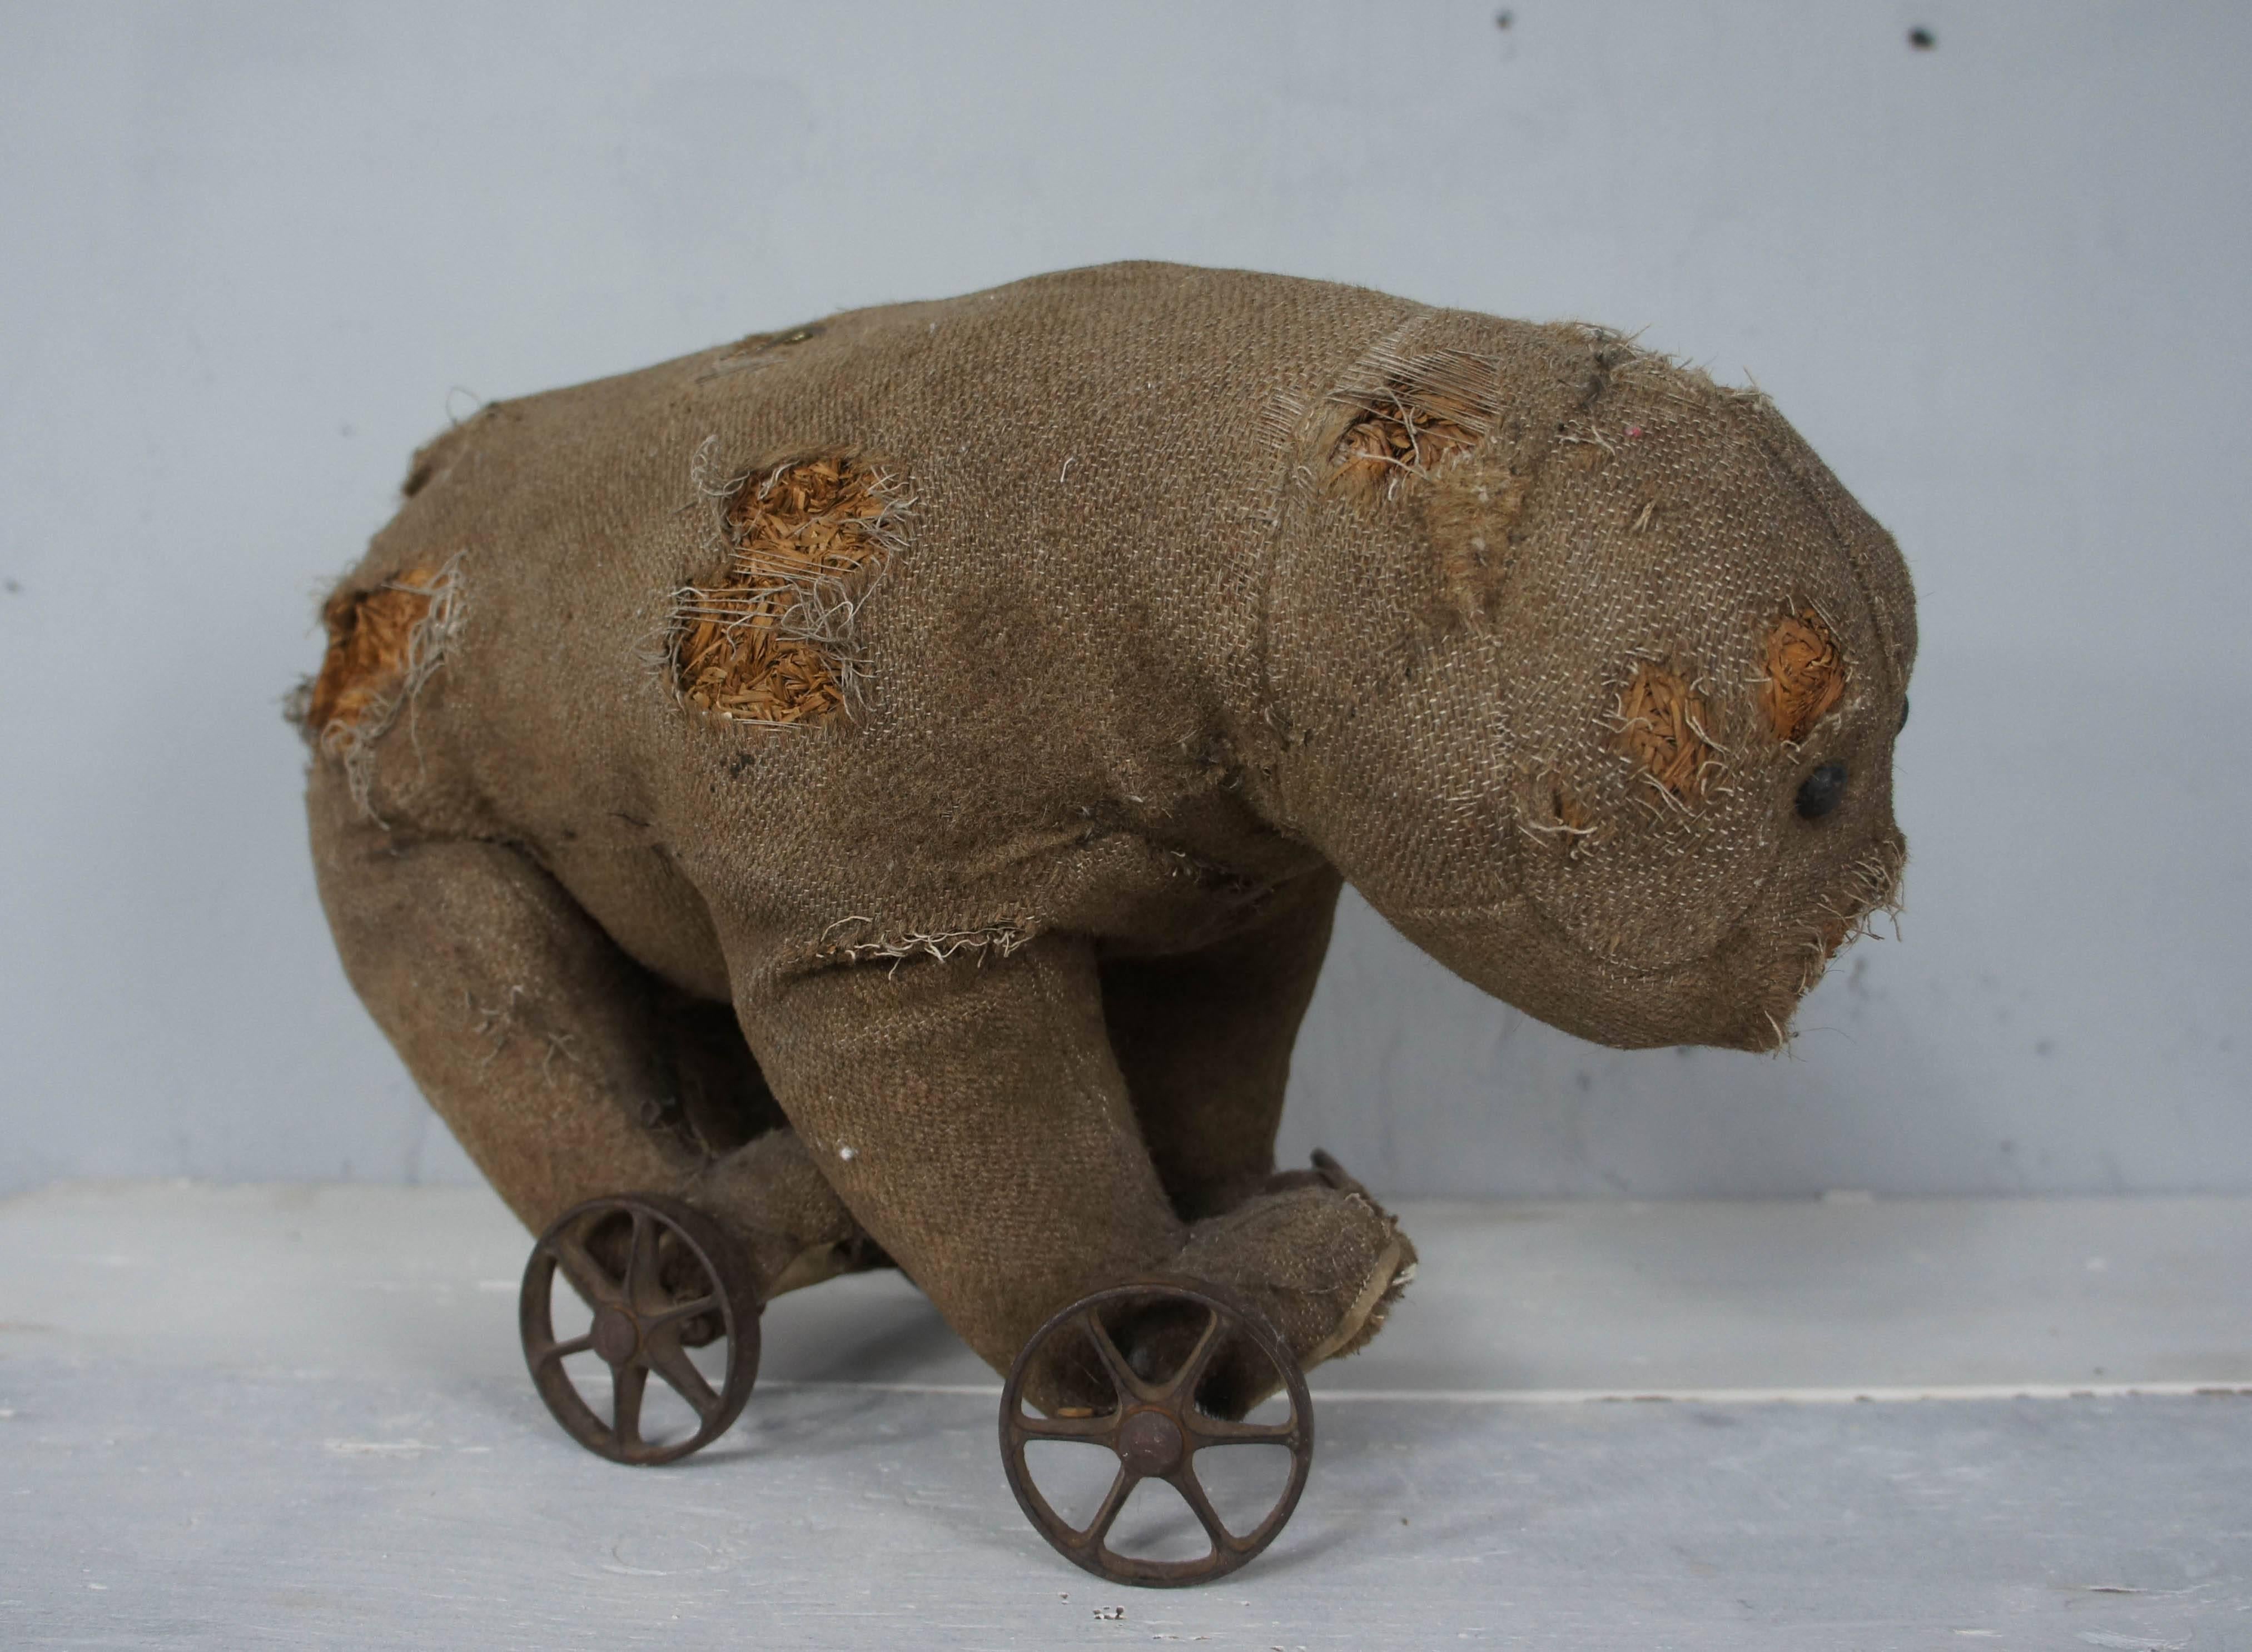 Absolutely adorable very early Steiff bear on cast iron wheels. He must have been very much loved and played with during his existence, as shown by the amount of wear he has. He has lost his mohair fur but retains hessian cloth with some holes over